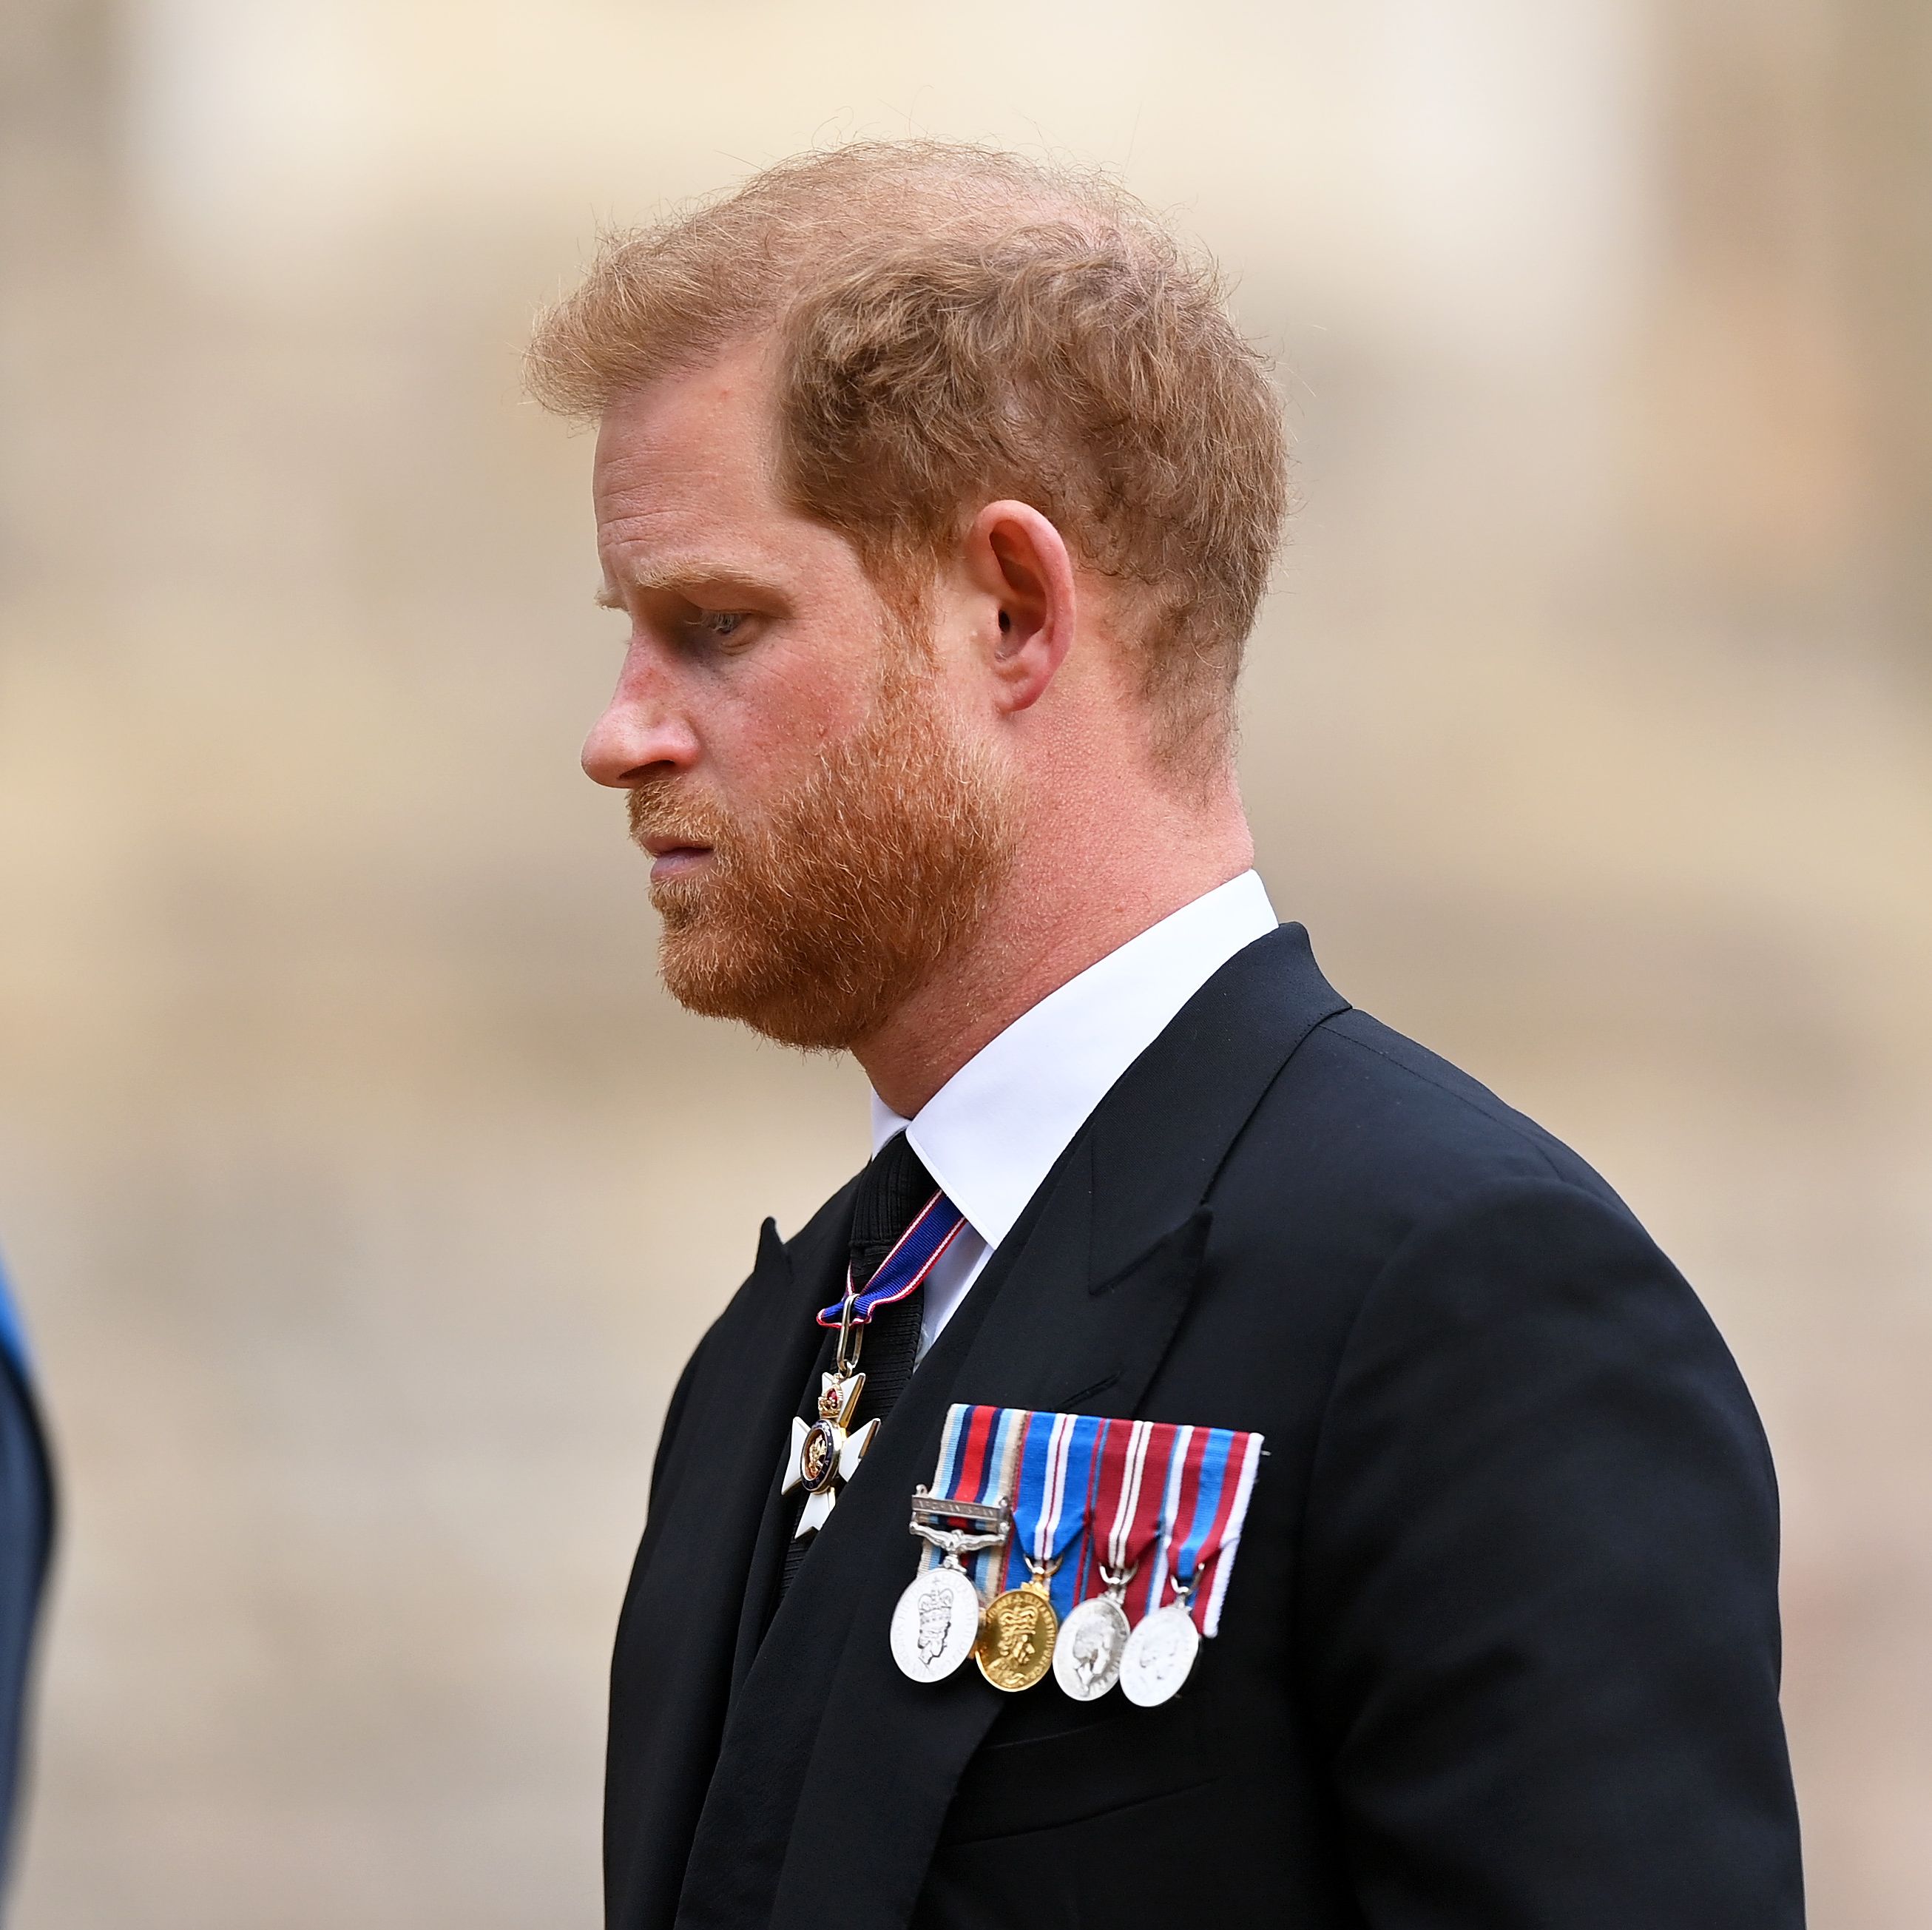 Prince William's Reputation Is in the Firing Line as Prince Harry's Memoir Lays Fight Bare